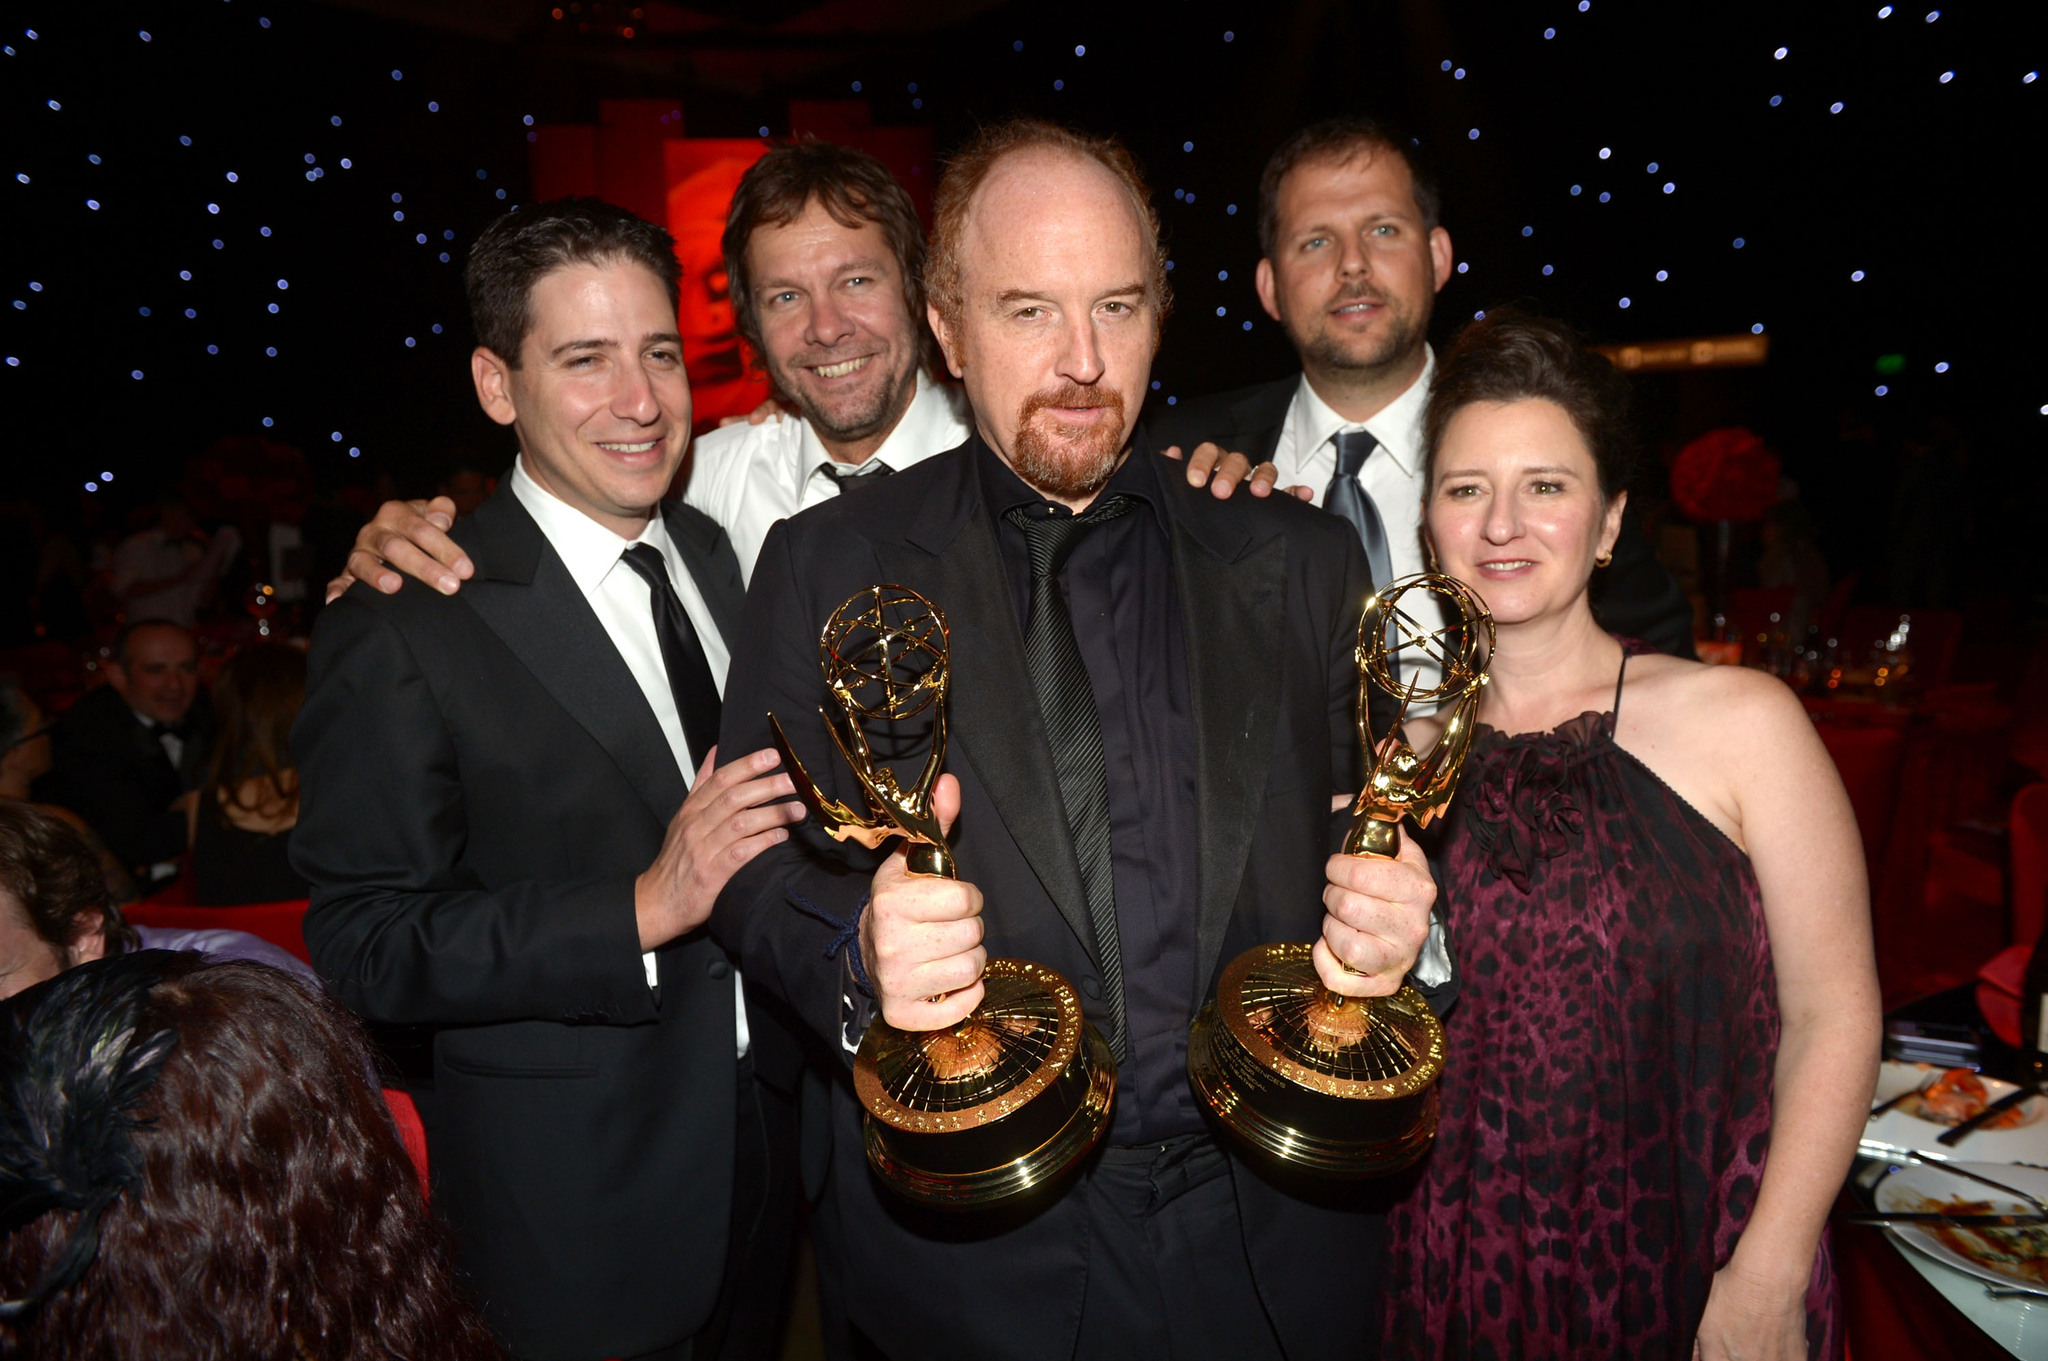 Dave Becky, Blair Breard, Louis C.K. and Nick Grad at event of The 64th Primetime Emmy Awards (2012)